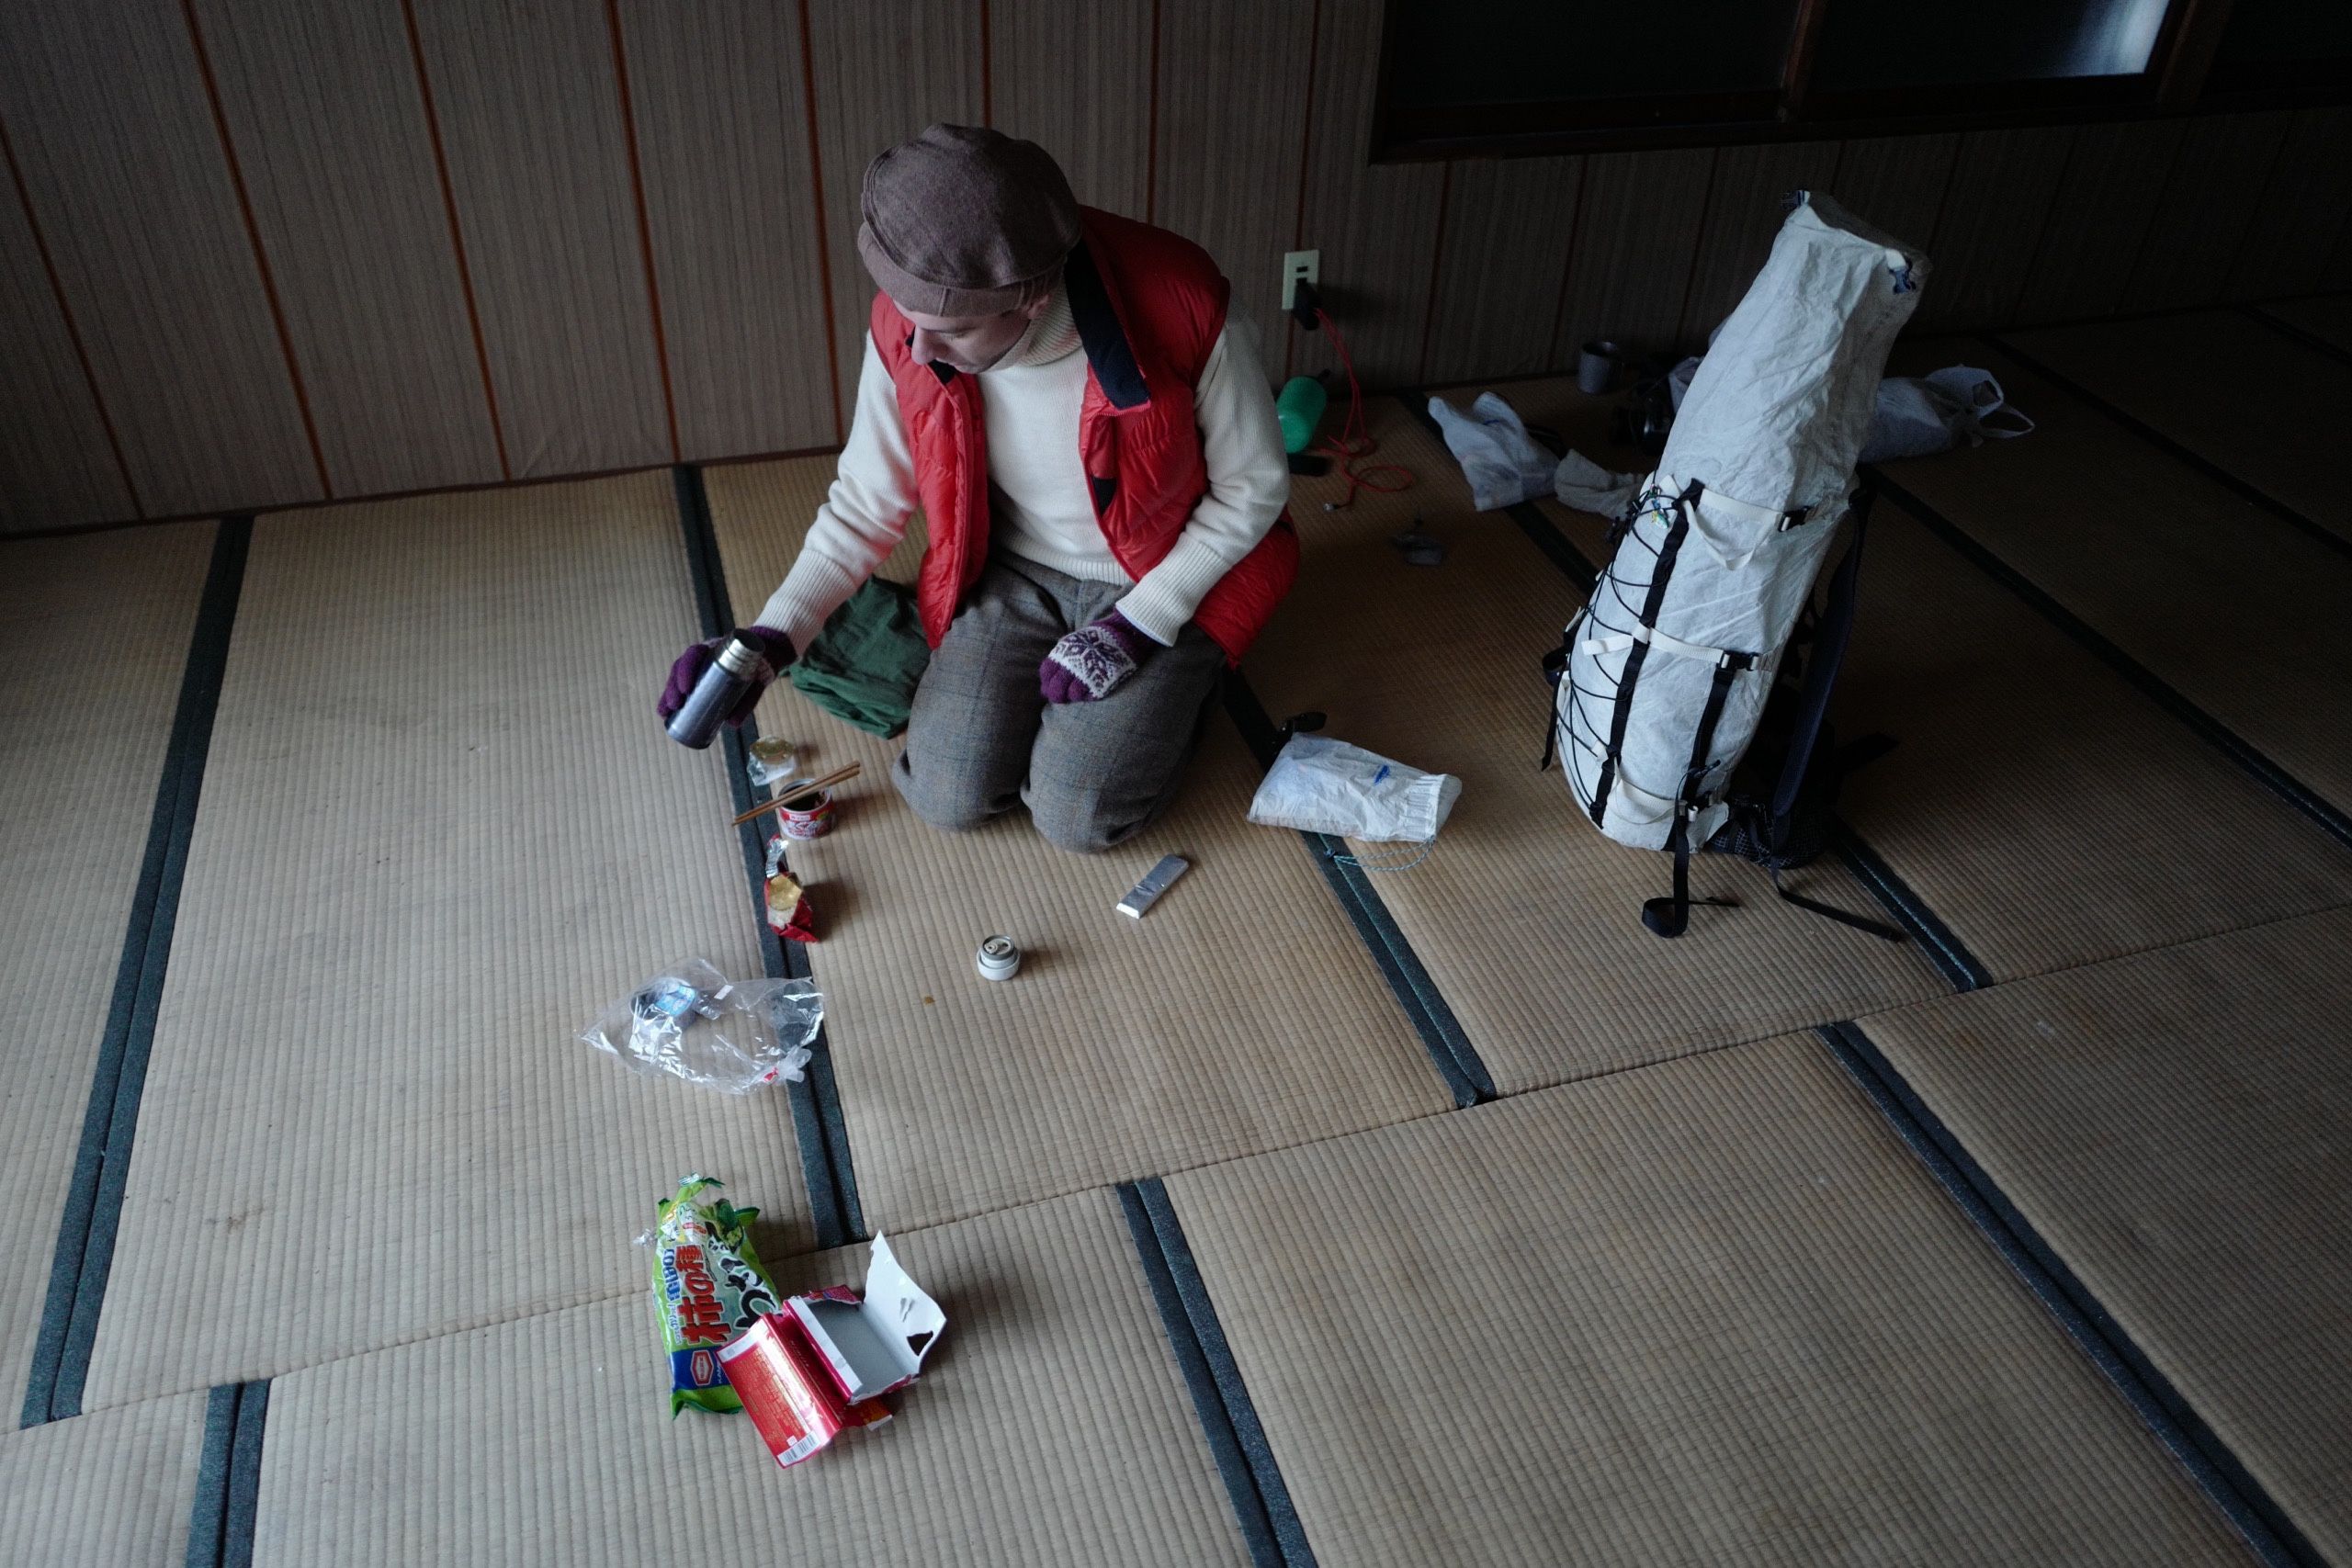 A man in winter clothes, the author, kneels on a tatami floor and pours coffee from a thermos.